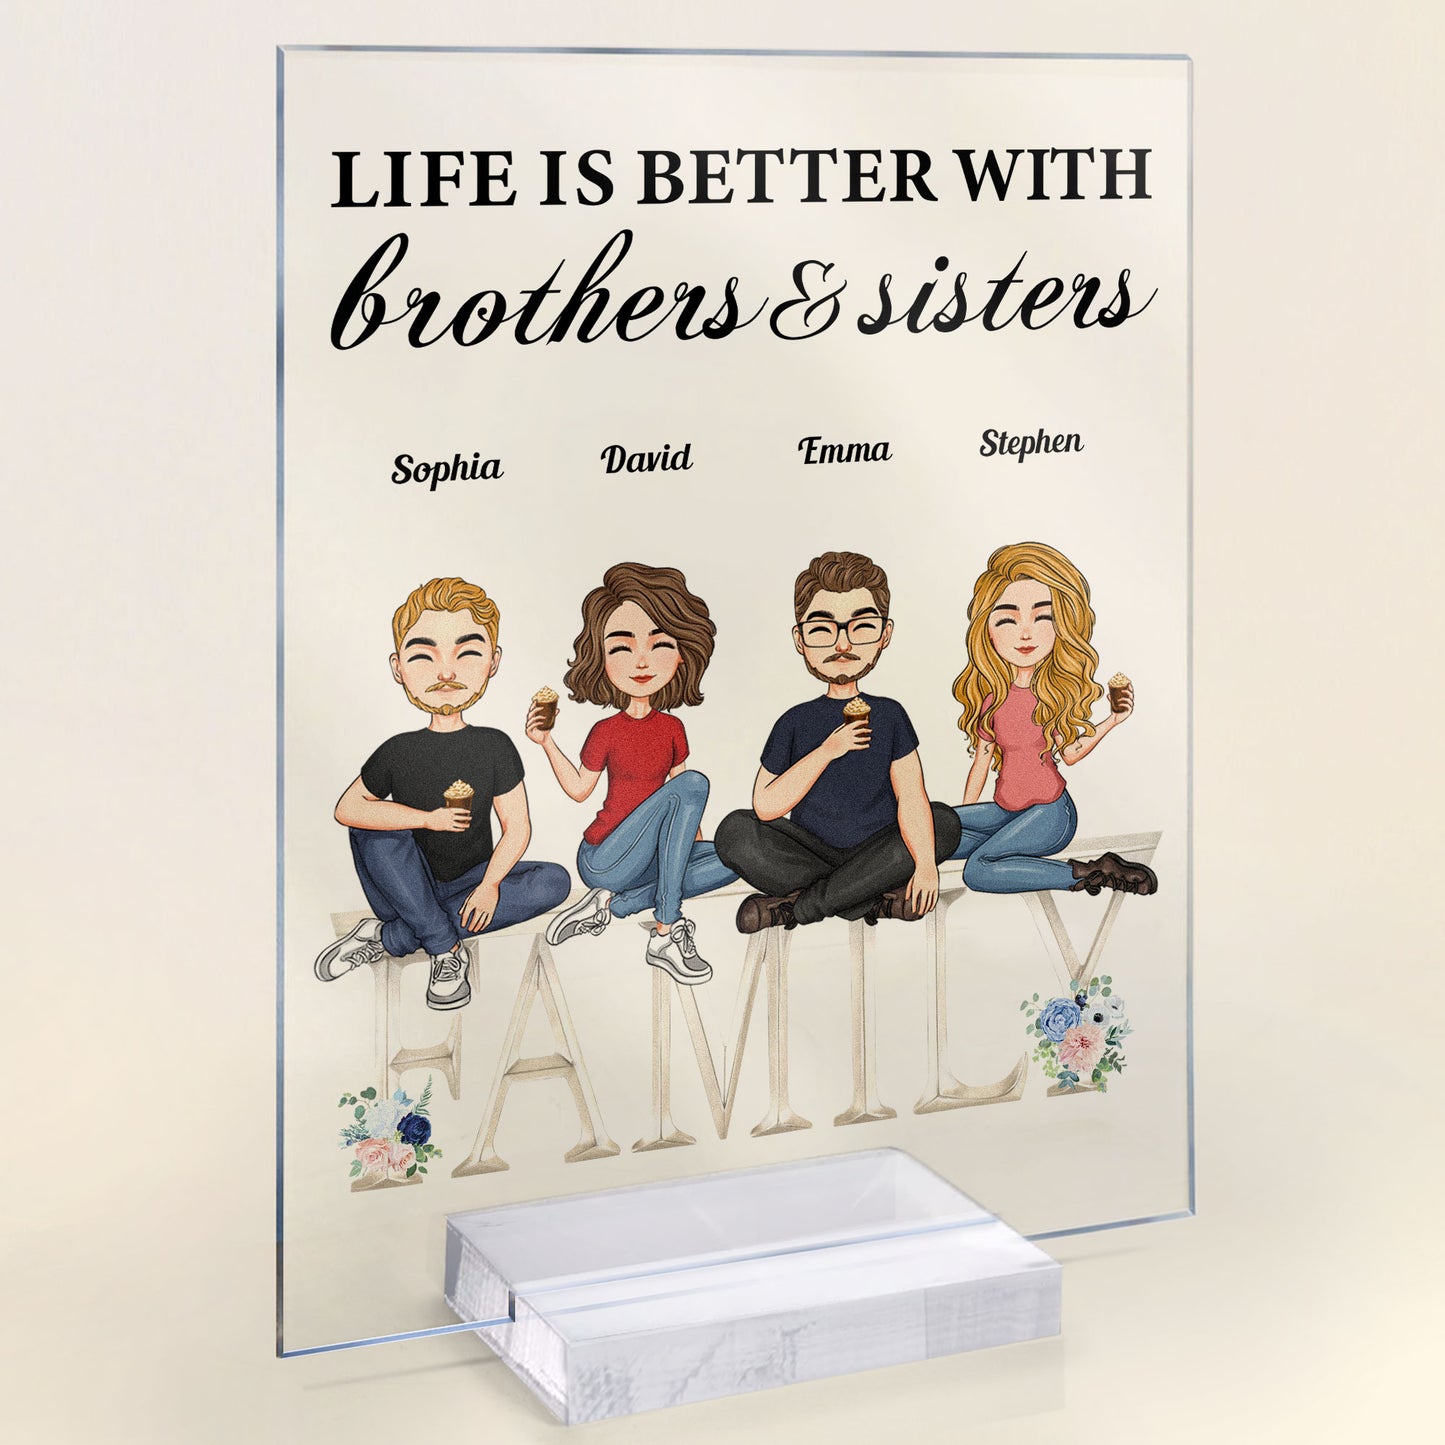 Life Is Better With Sisters And Brothers - Cartoon Version - Personalized Acrylic Plaque - Birthday, New Year Gift For Family, Sisters, Brothers, Siblings